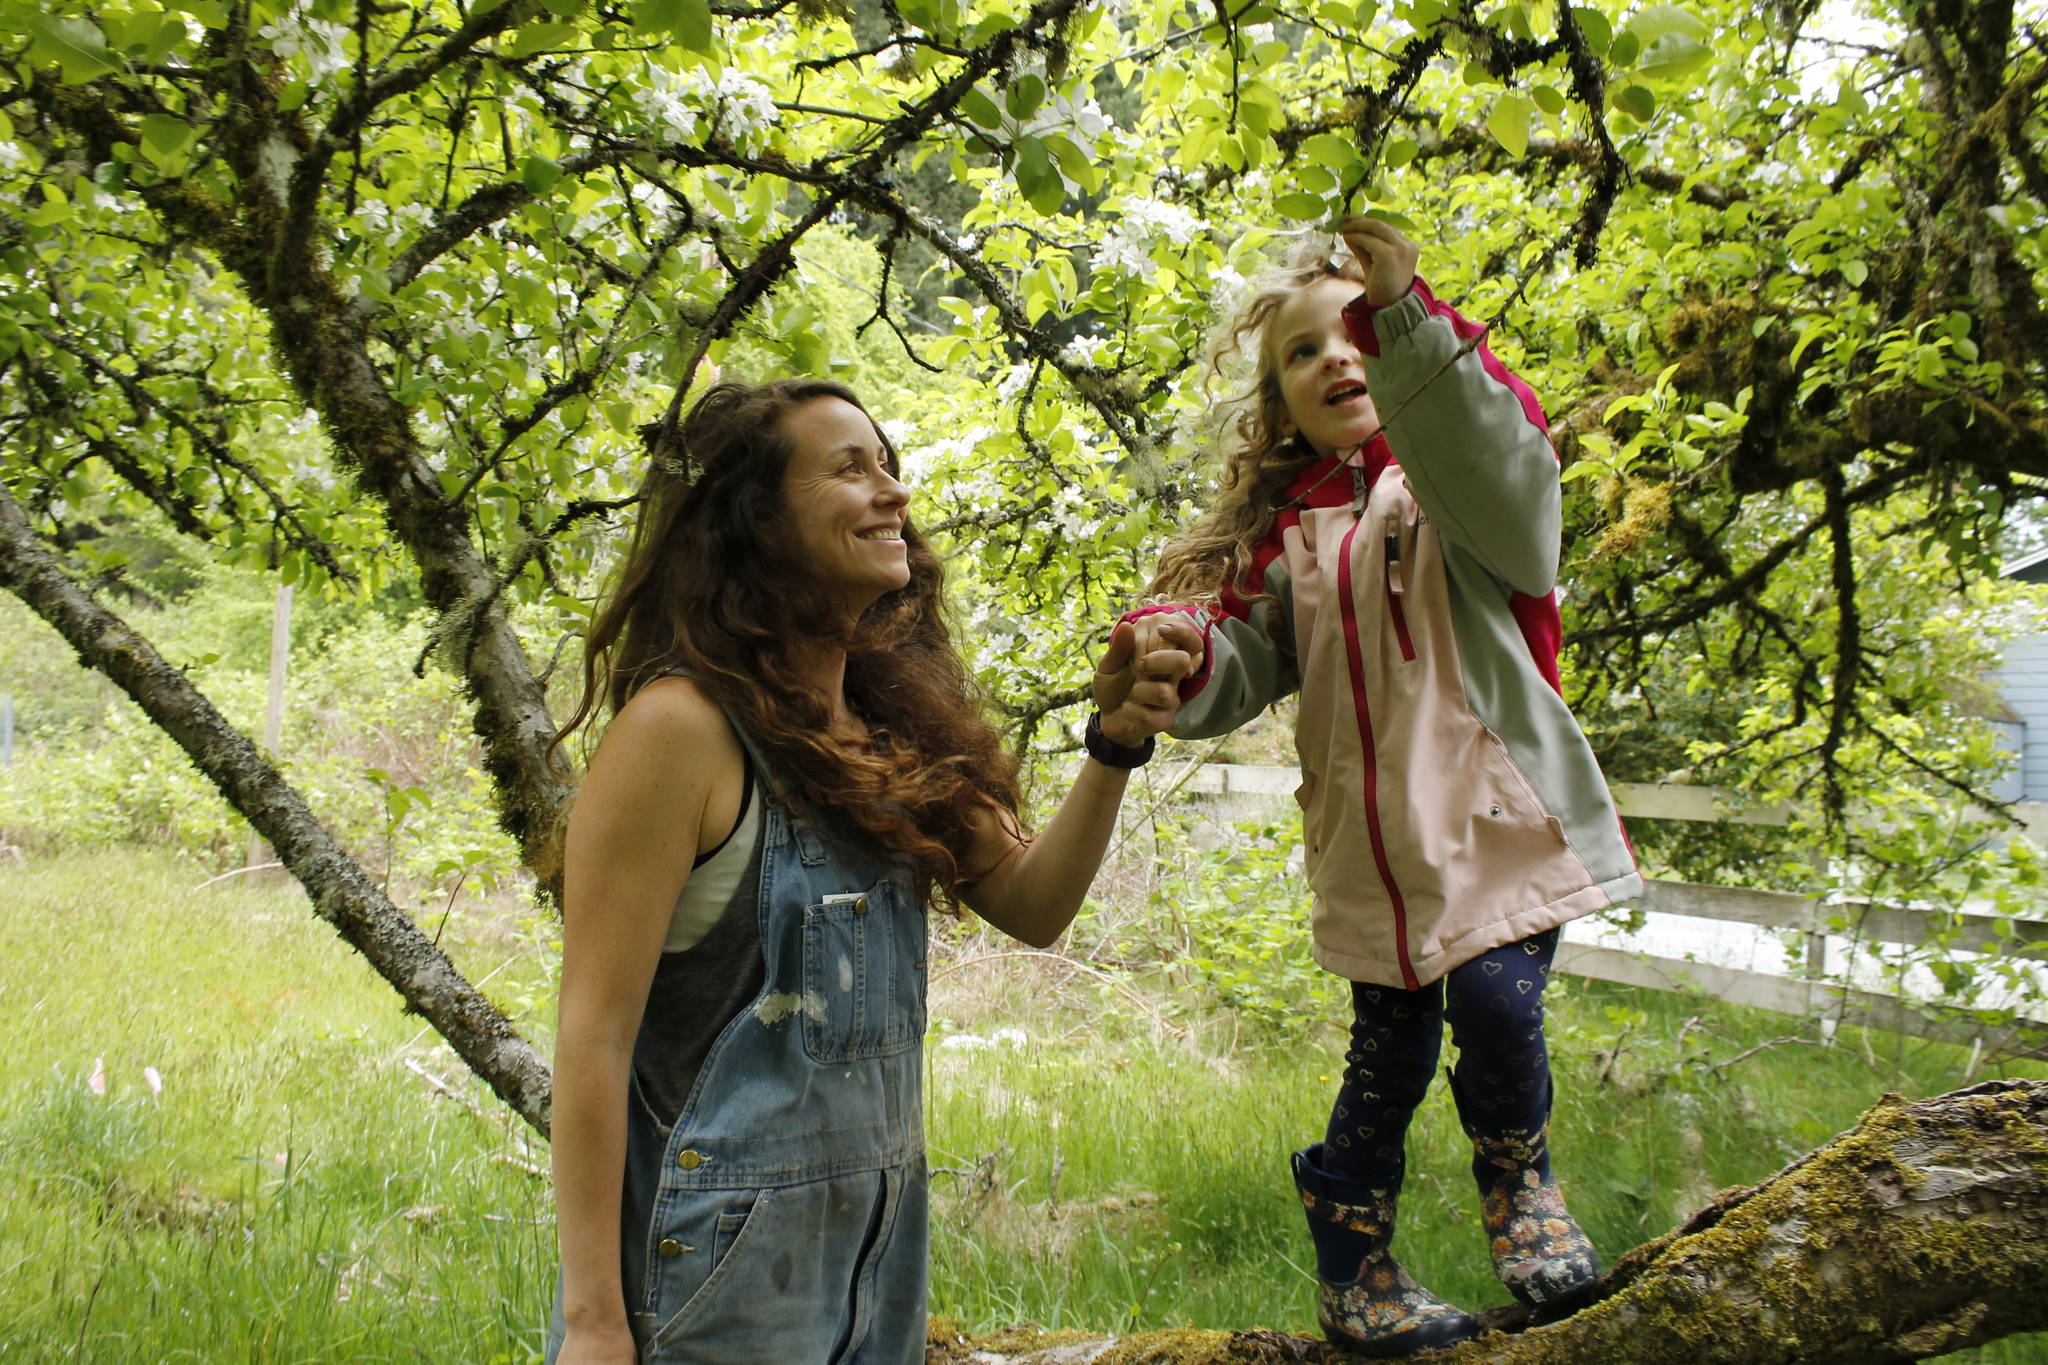 Aja Stewart and her daughter Rainey, 4, search for bees in a tree in bloom at Sweetwater Farm in Clinton. (Photos by Kira Erickson/South Whidbey Record)